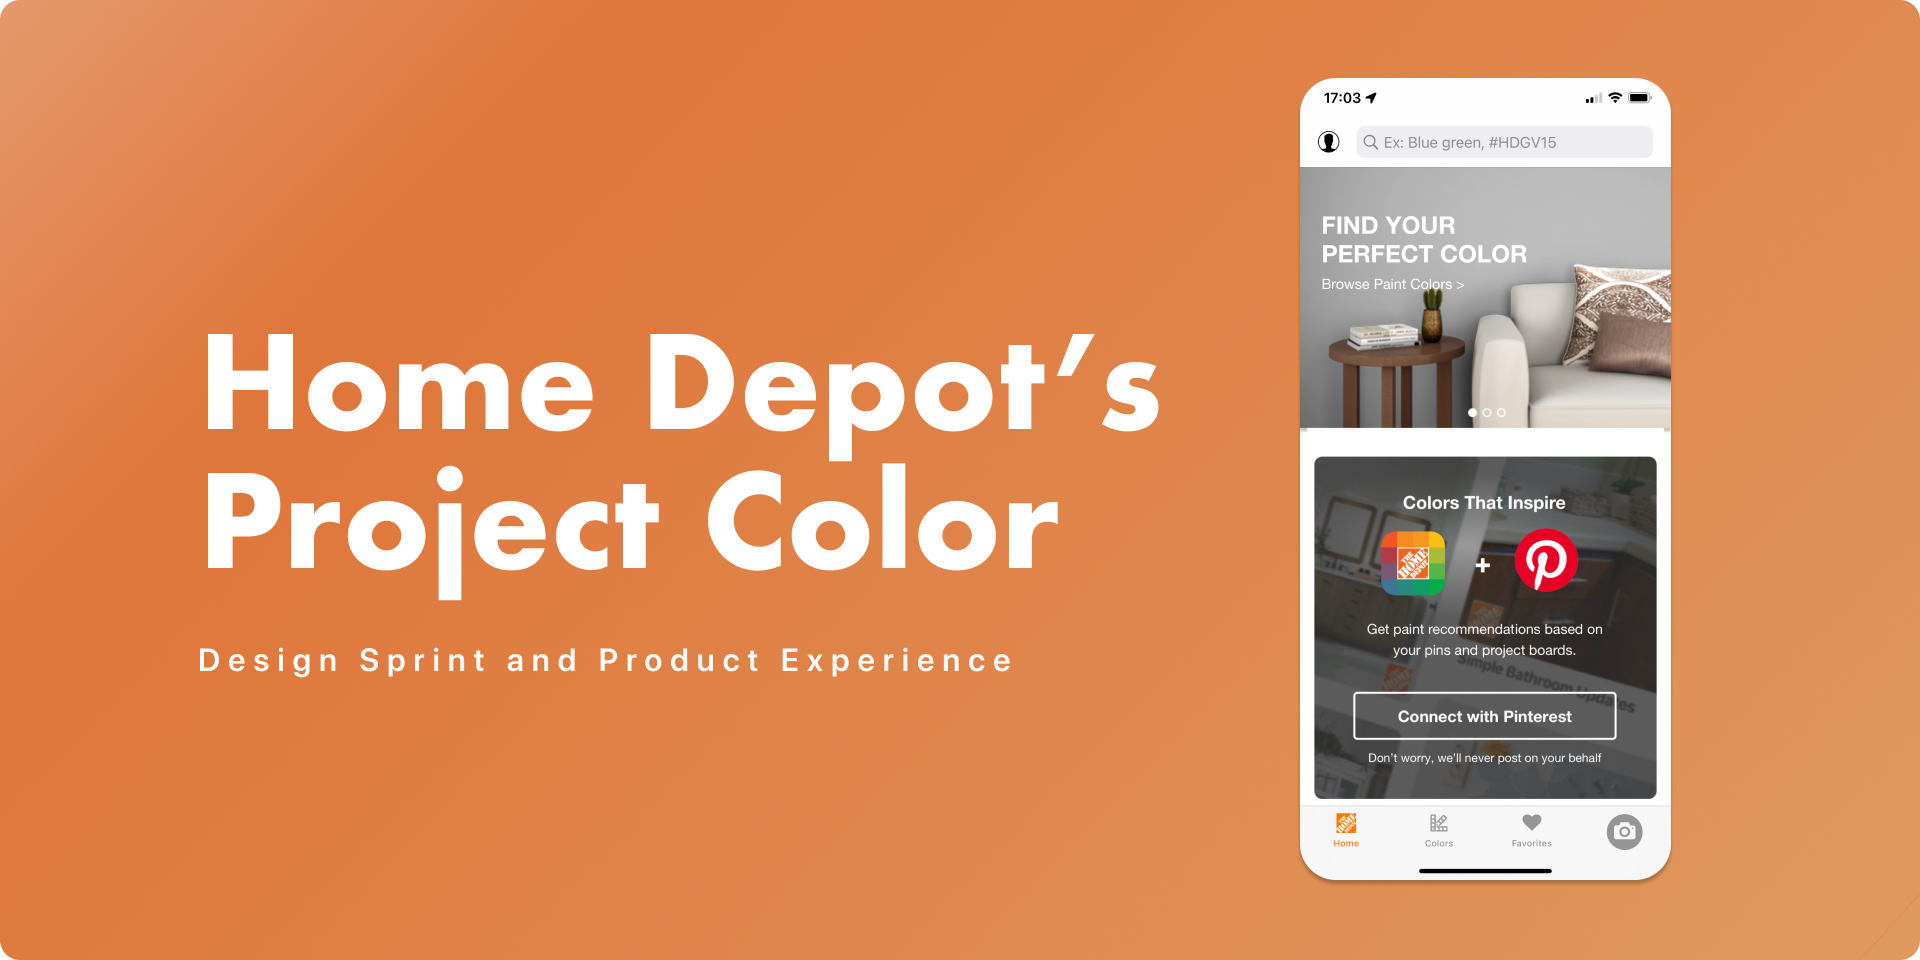 The Home Depot ProjectColor App